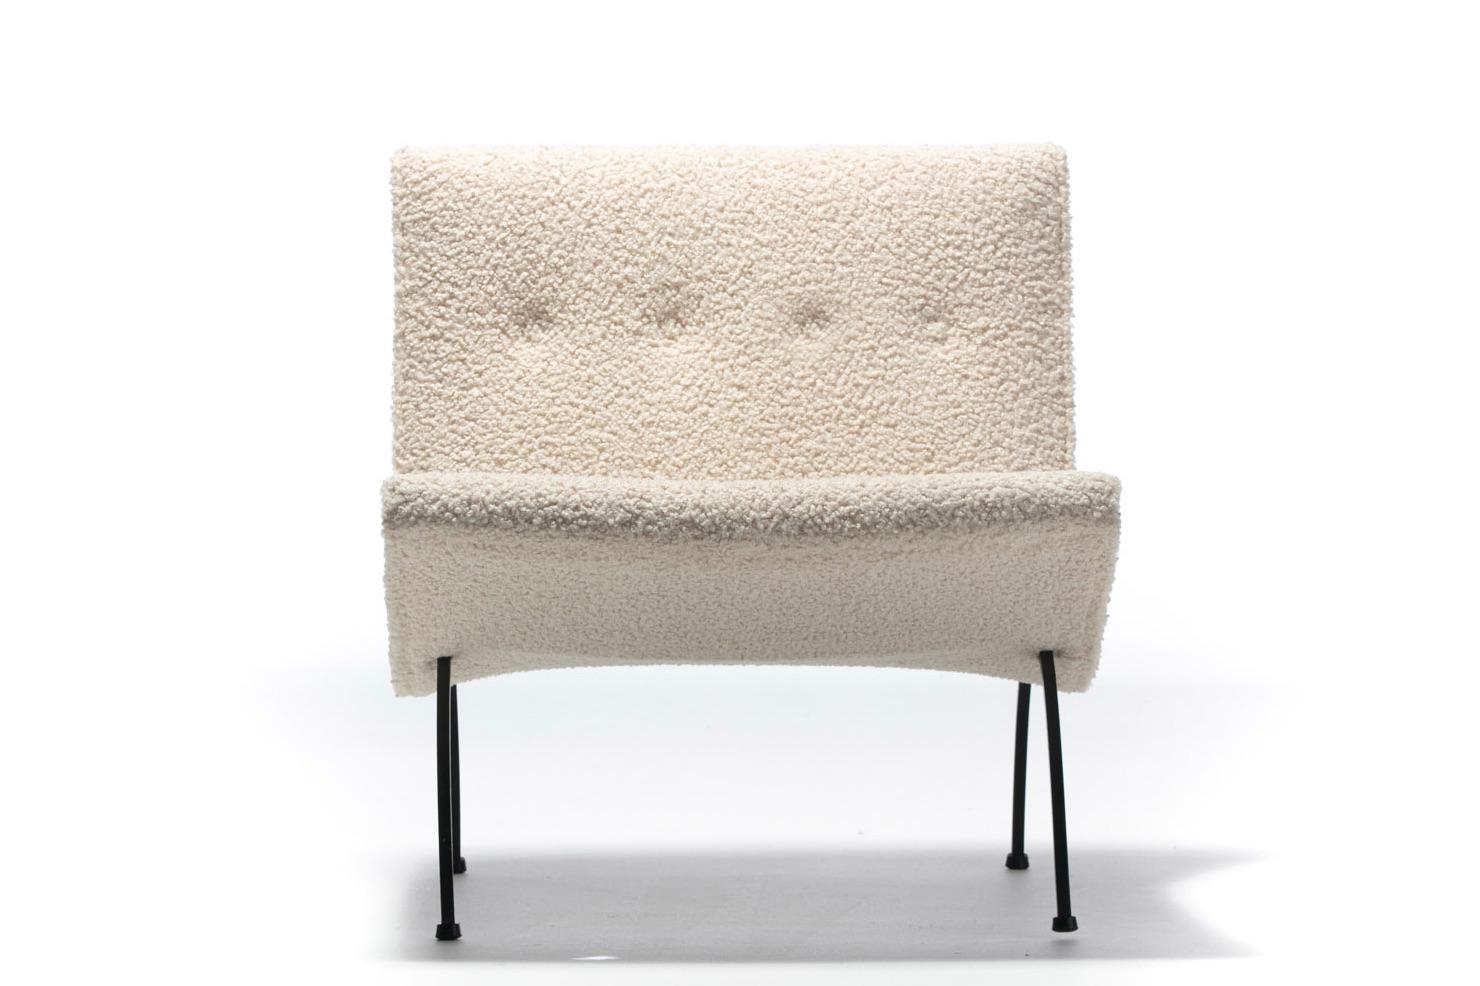 Milo Baughman Scoop Chair in Super Soft Ivory Bouclé with Iron Legs c. 1950s  For Sale 2